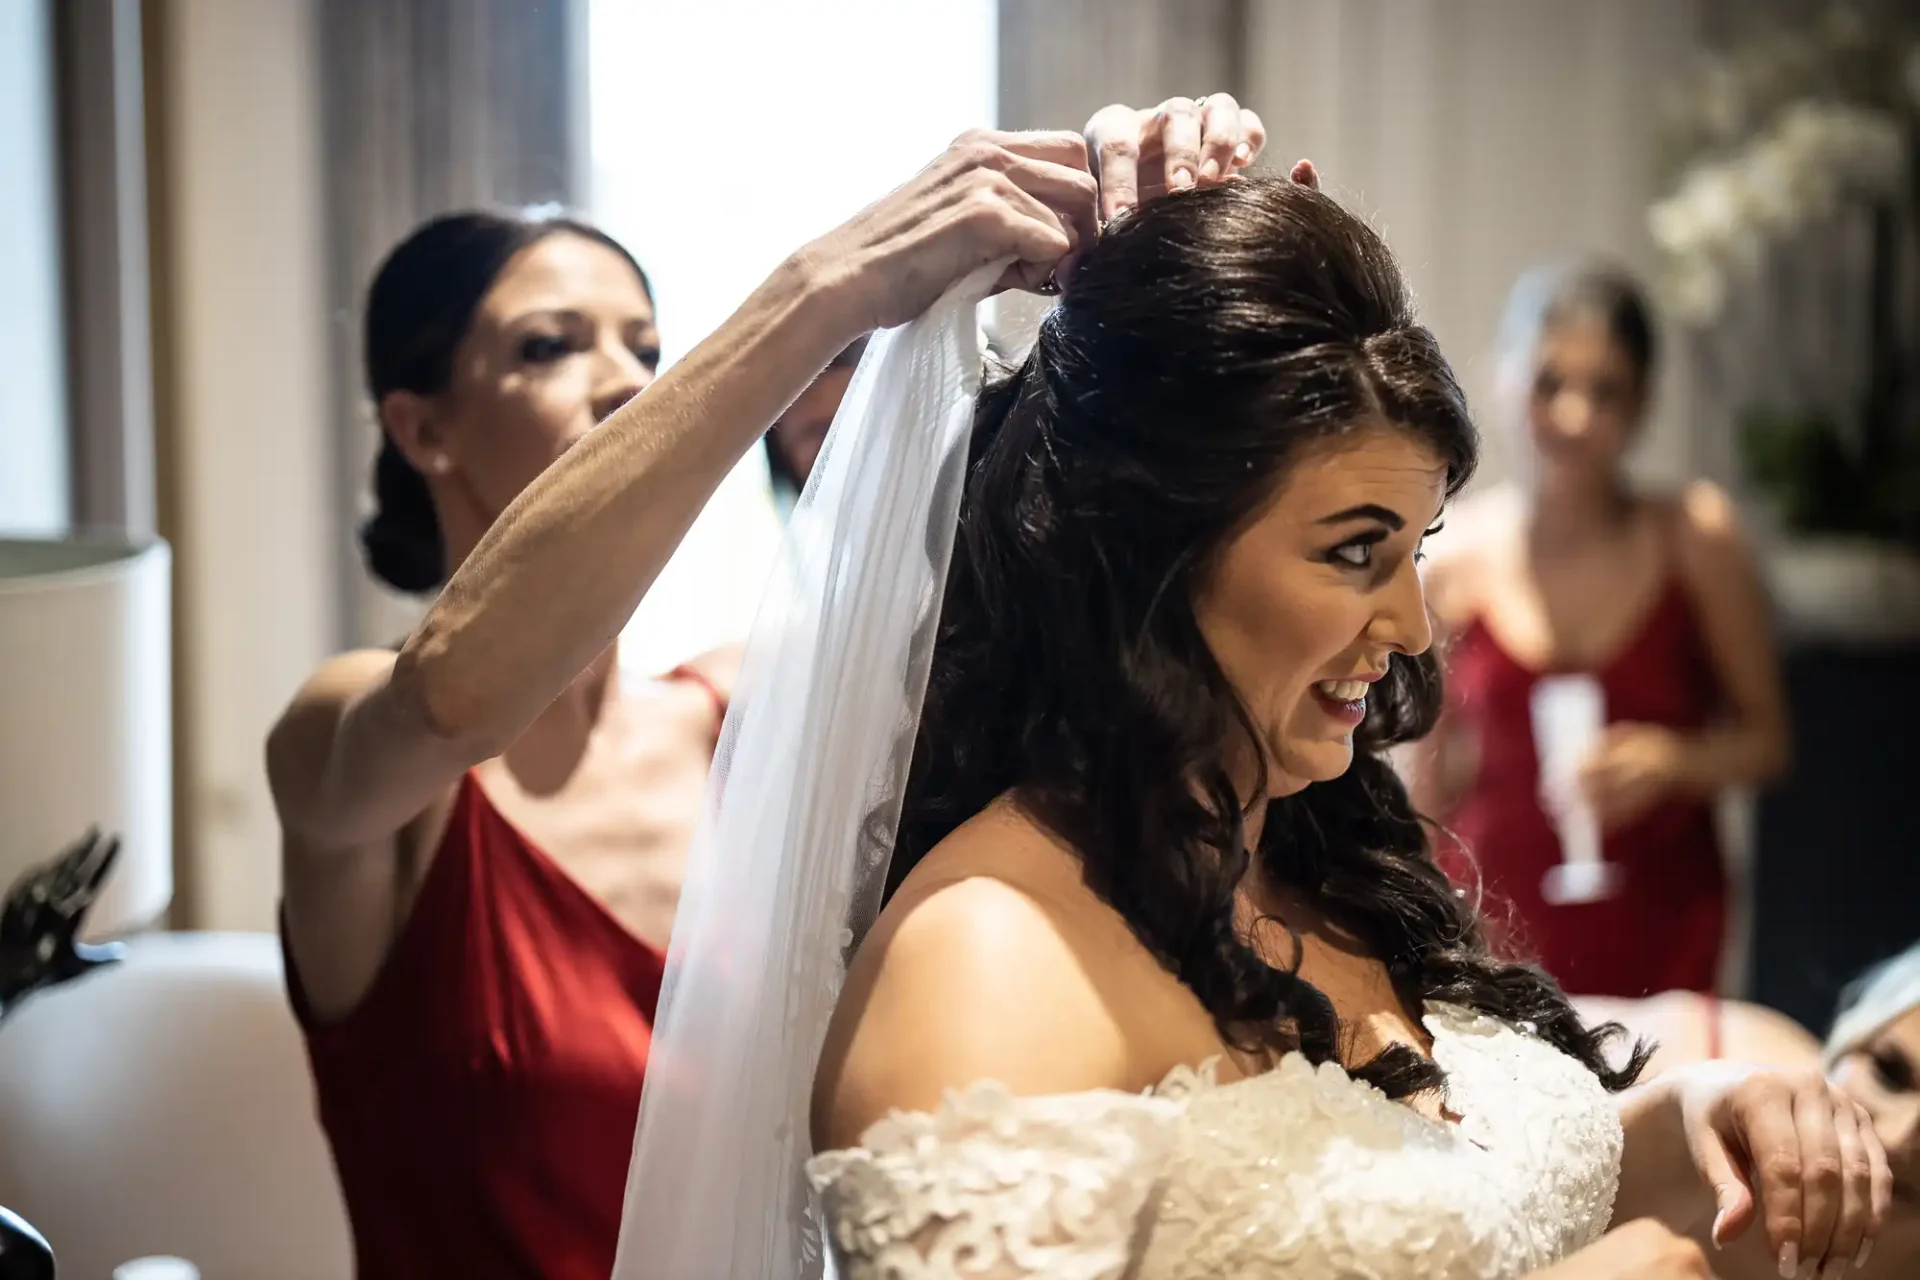 A bride smiles as another woman adjusts her veil in a room, with a bridesmaid in a red dress in the background.